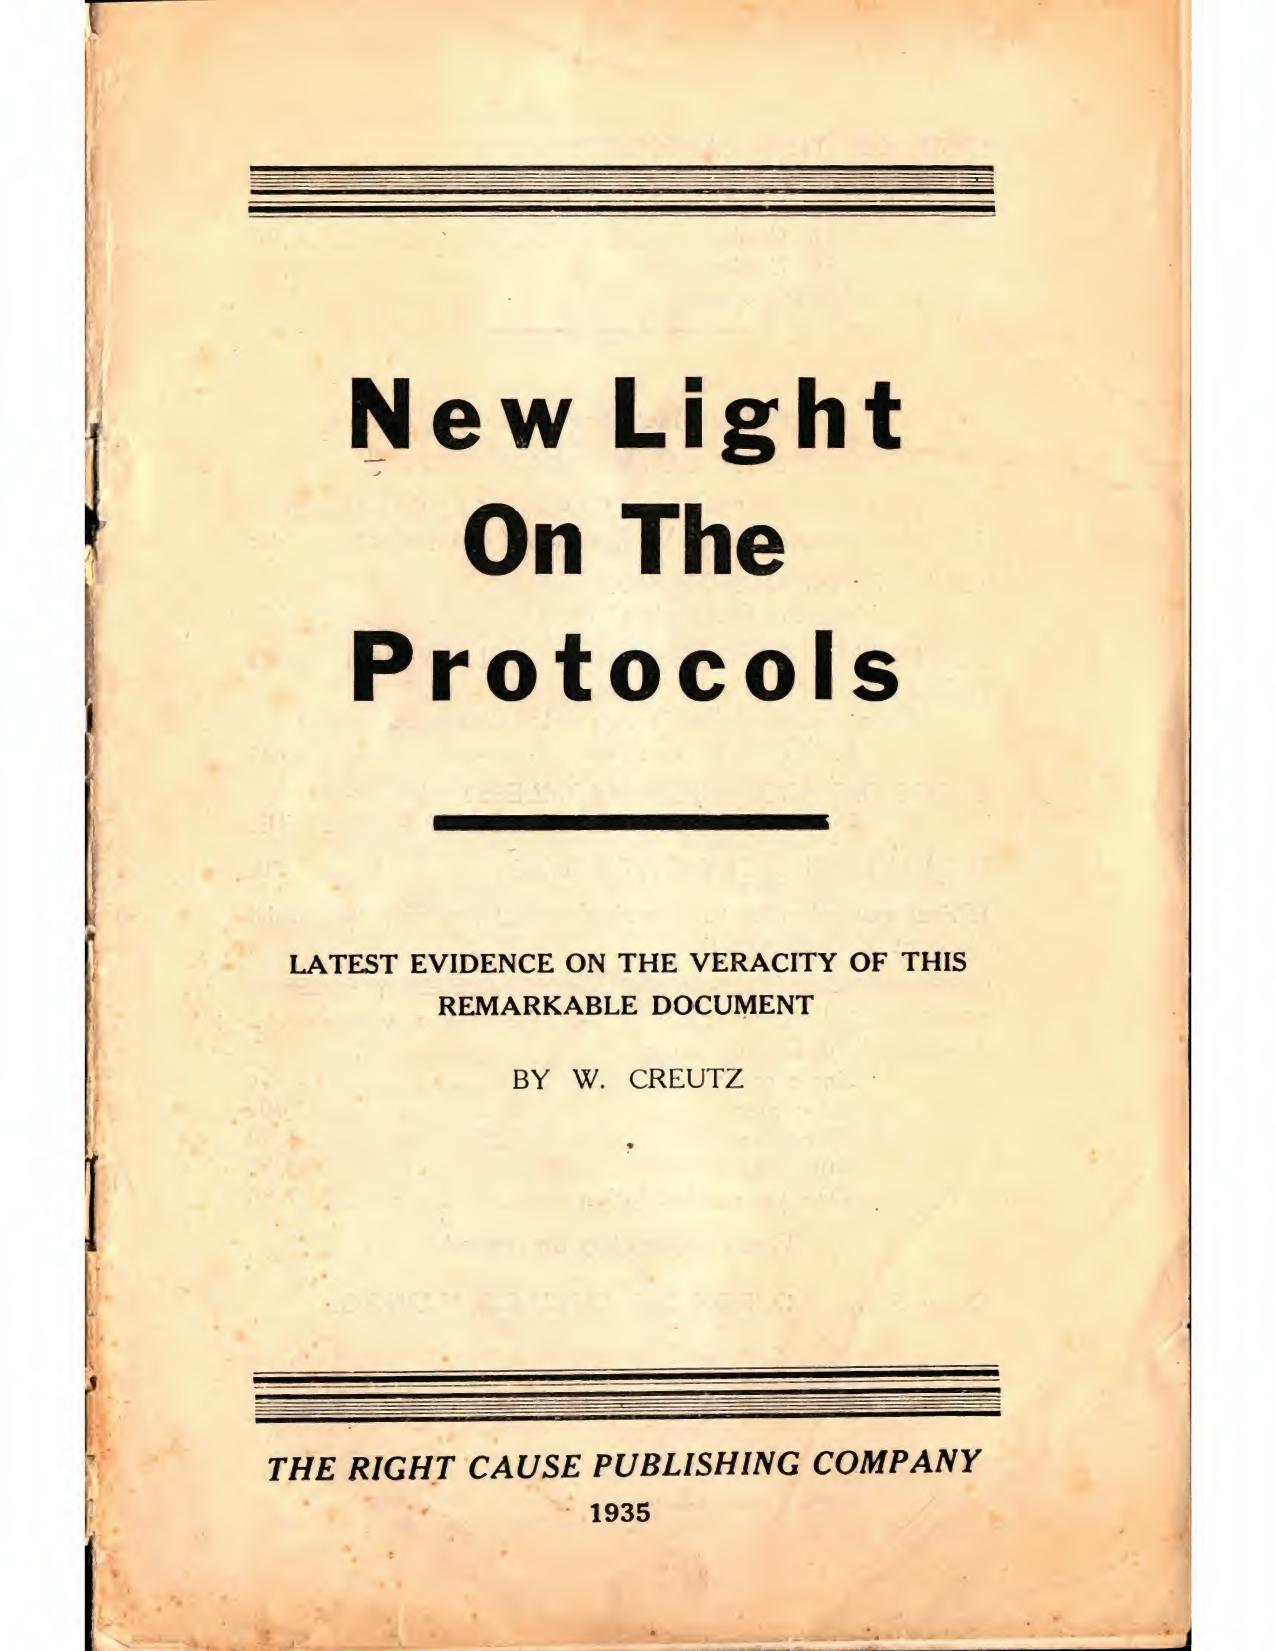 New Light On The Protocols - Latest Evidence On The Veracity Of This Remarkable Document (1935) by W. Creutz